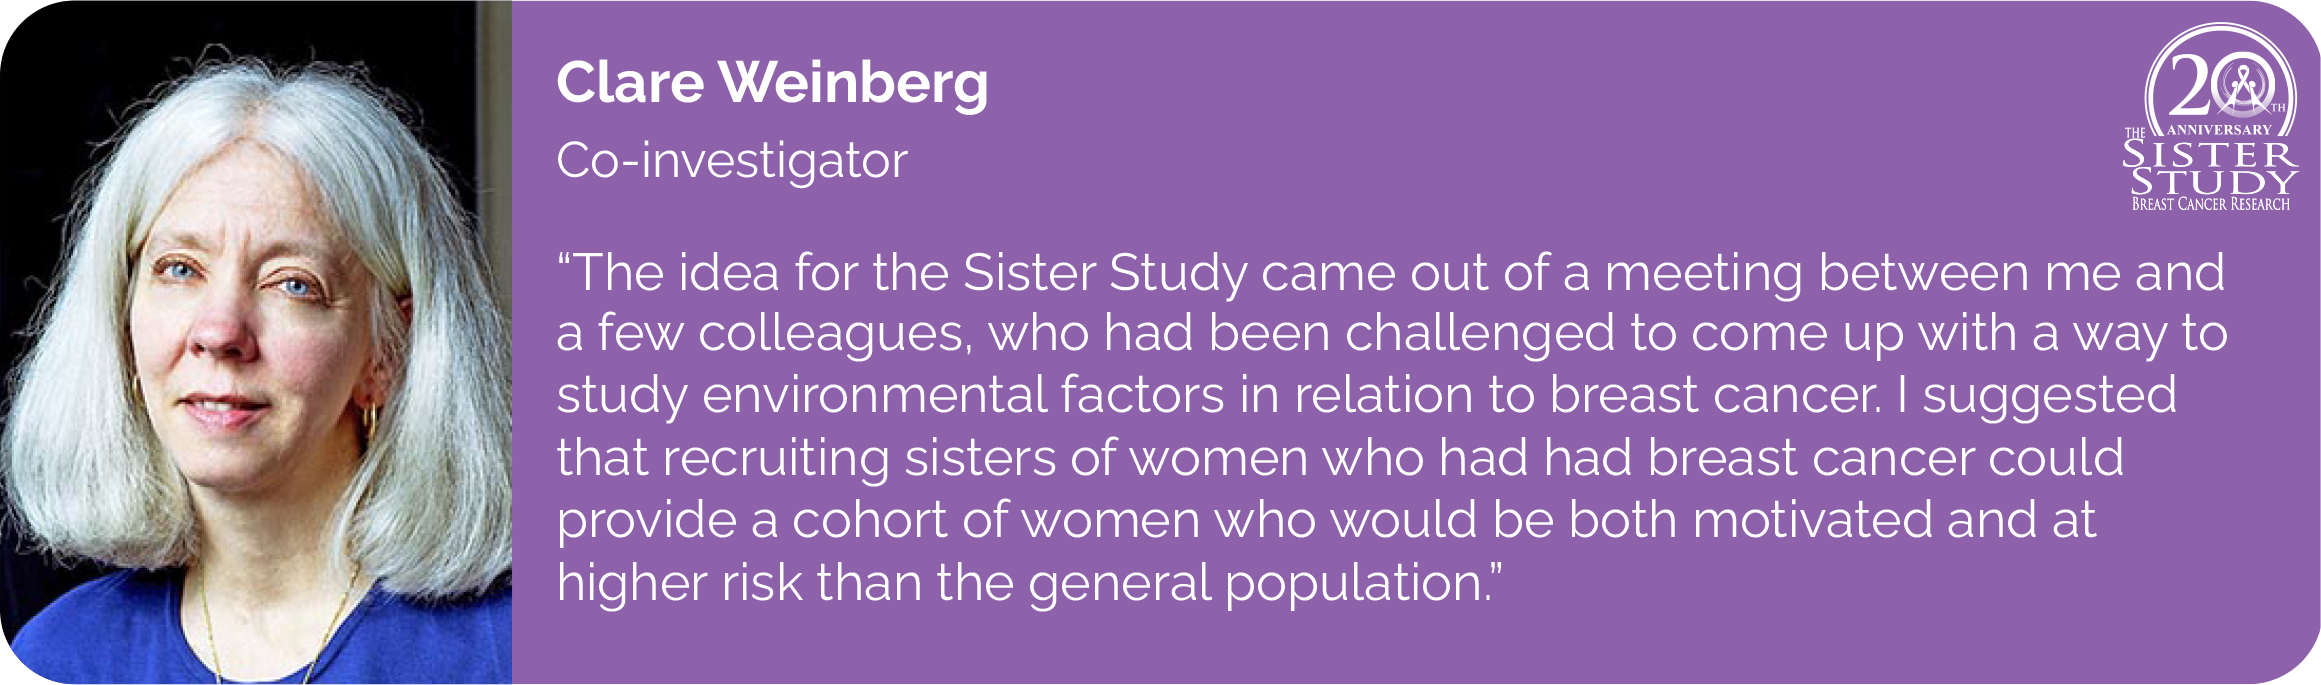 Clare Weinberg
Co-investigator
- The idea for the Sister Study came out of a meeting between me and a few colleagues, who had been challenged to come up with a way to study environmental factors in relation to breast cancer. I suggested that recruiting sisters of women who had had breast cancer could provide a cohort of women who would be both motivated and at higher risk than the general population.